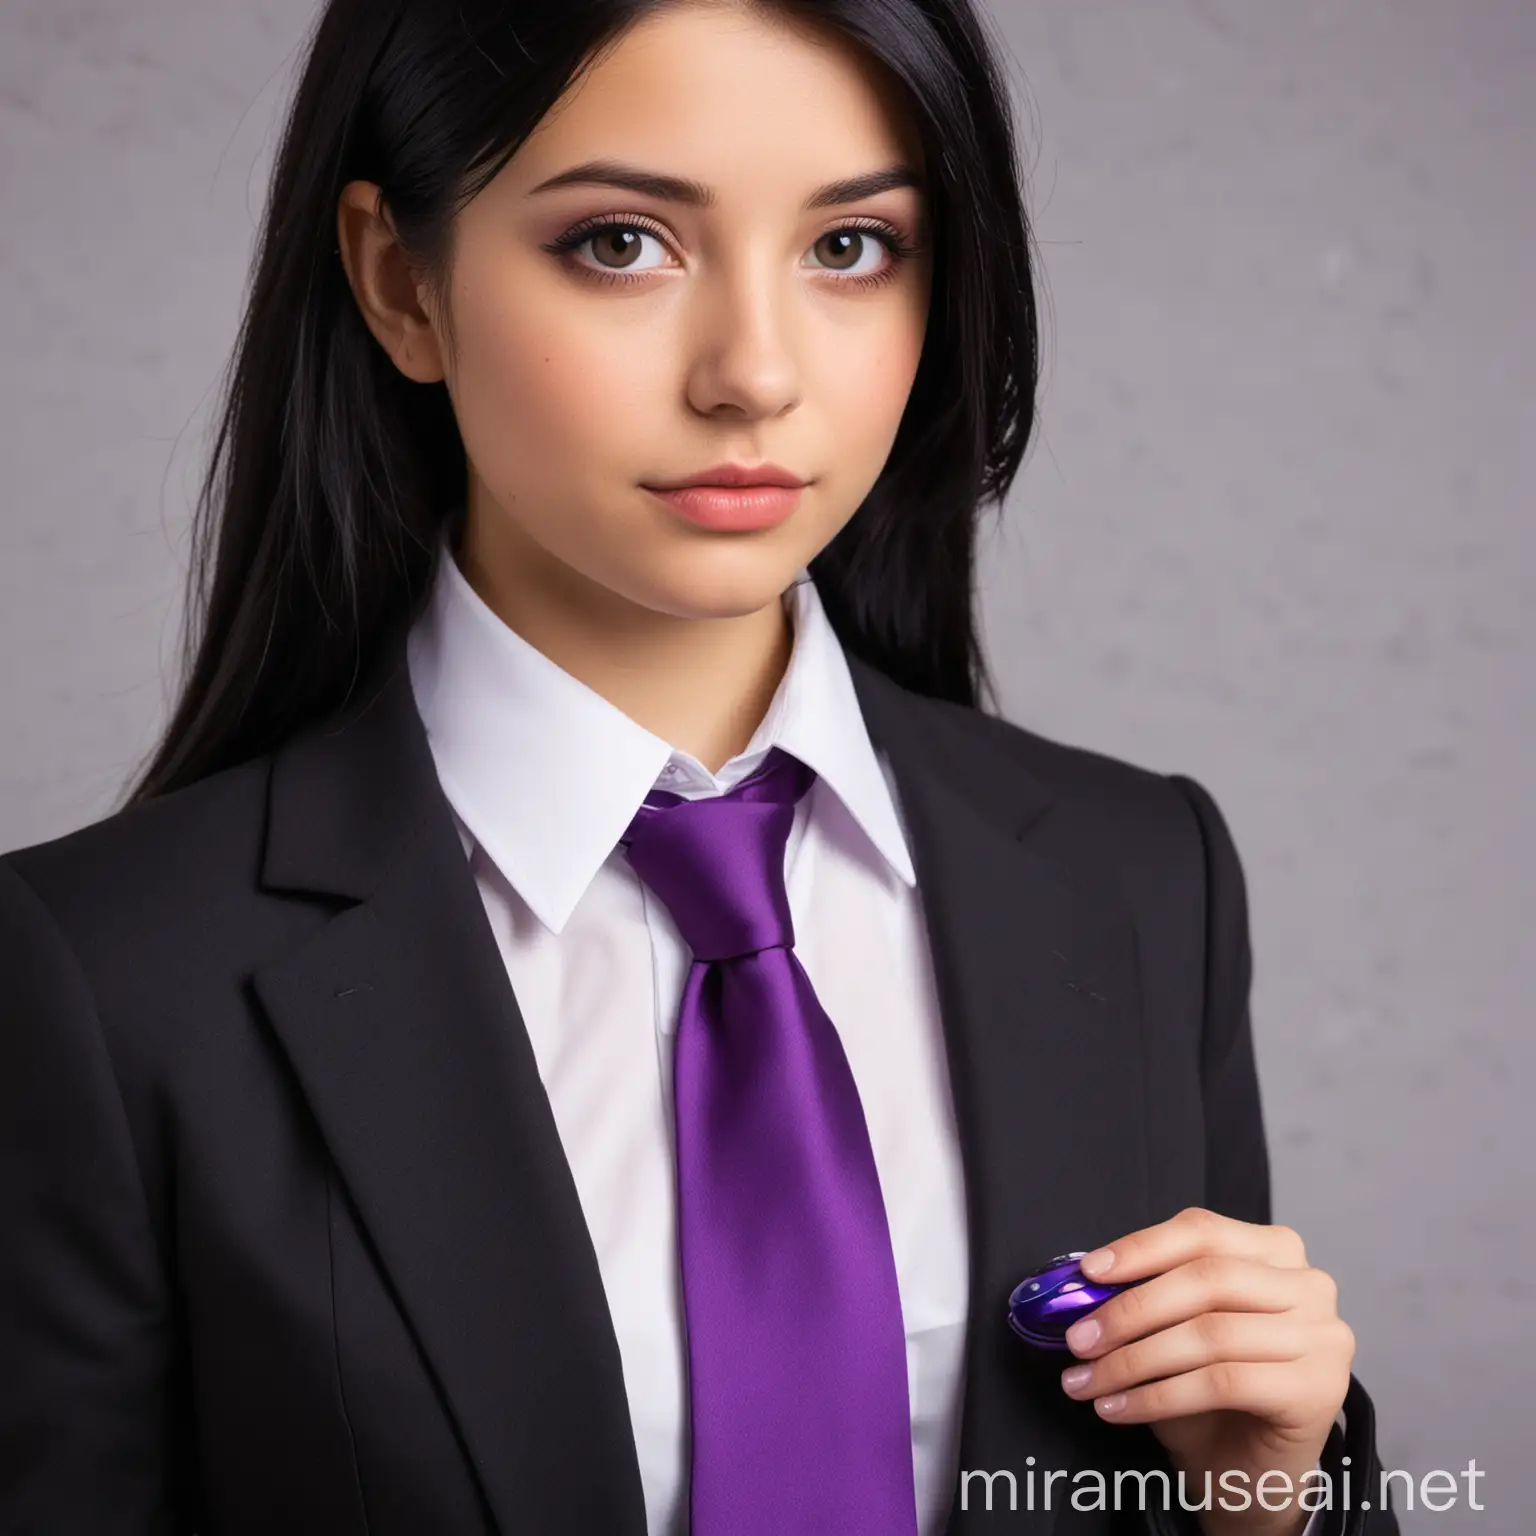 Formally Dressed Girl with Black Hair Holding a Violet Computer Mouse